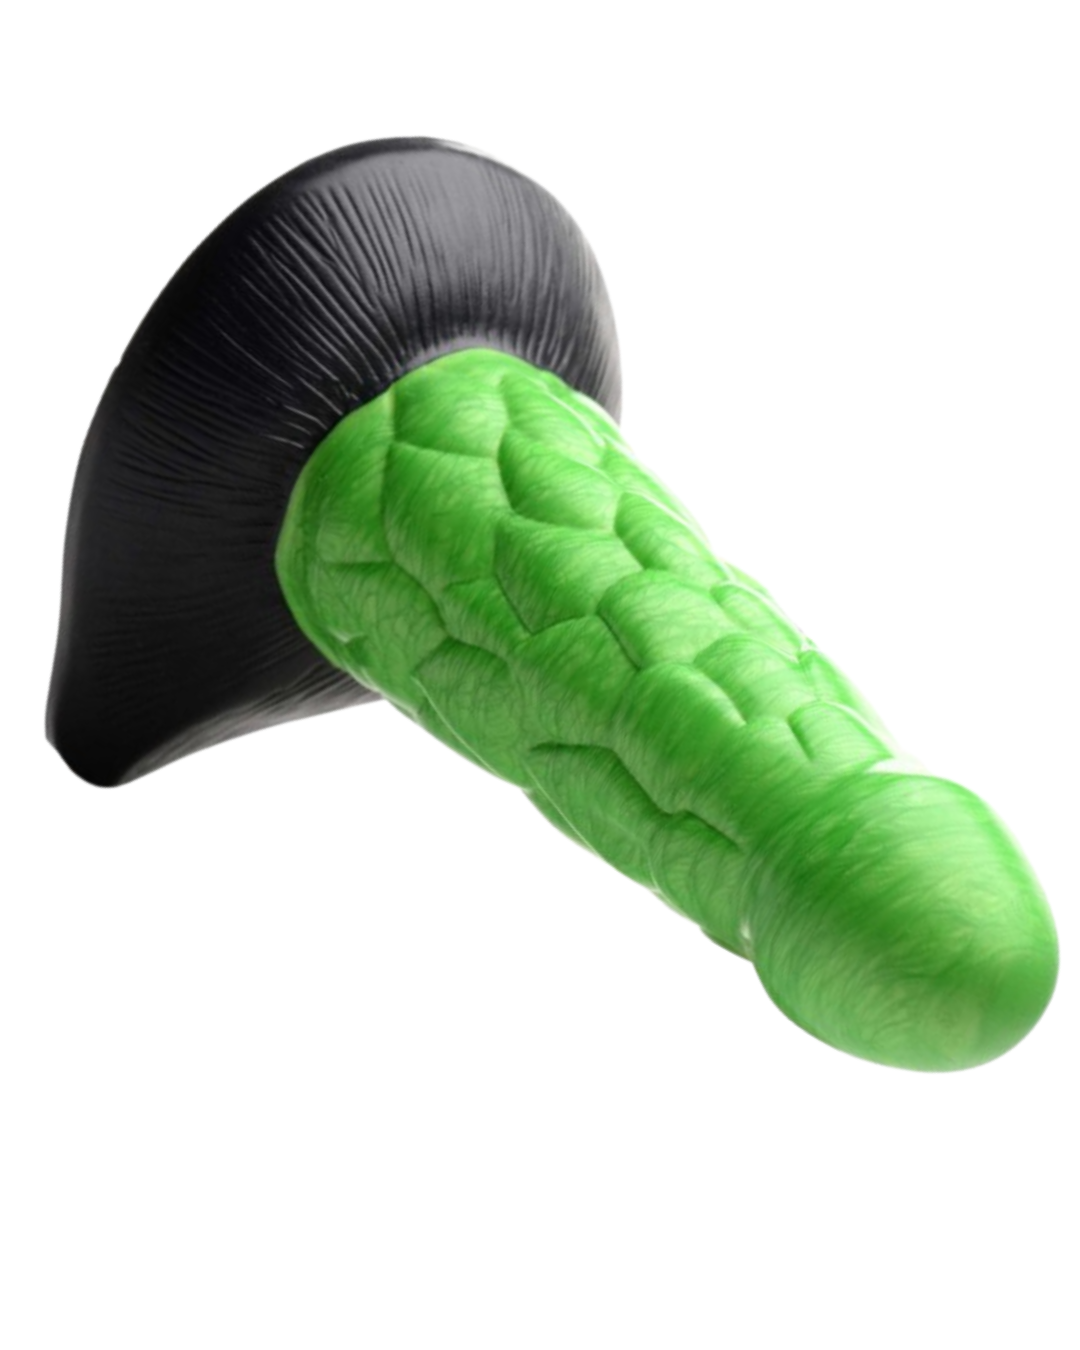 Radioactive Reptile Scaly Thick 7.5 Inch Silicone Fantasy Dildo close up of tip